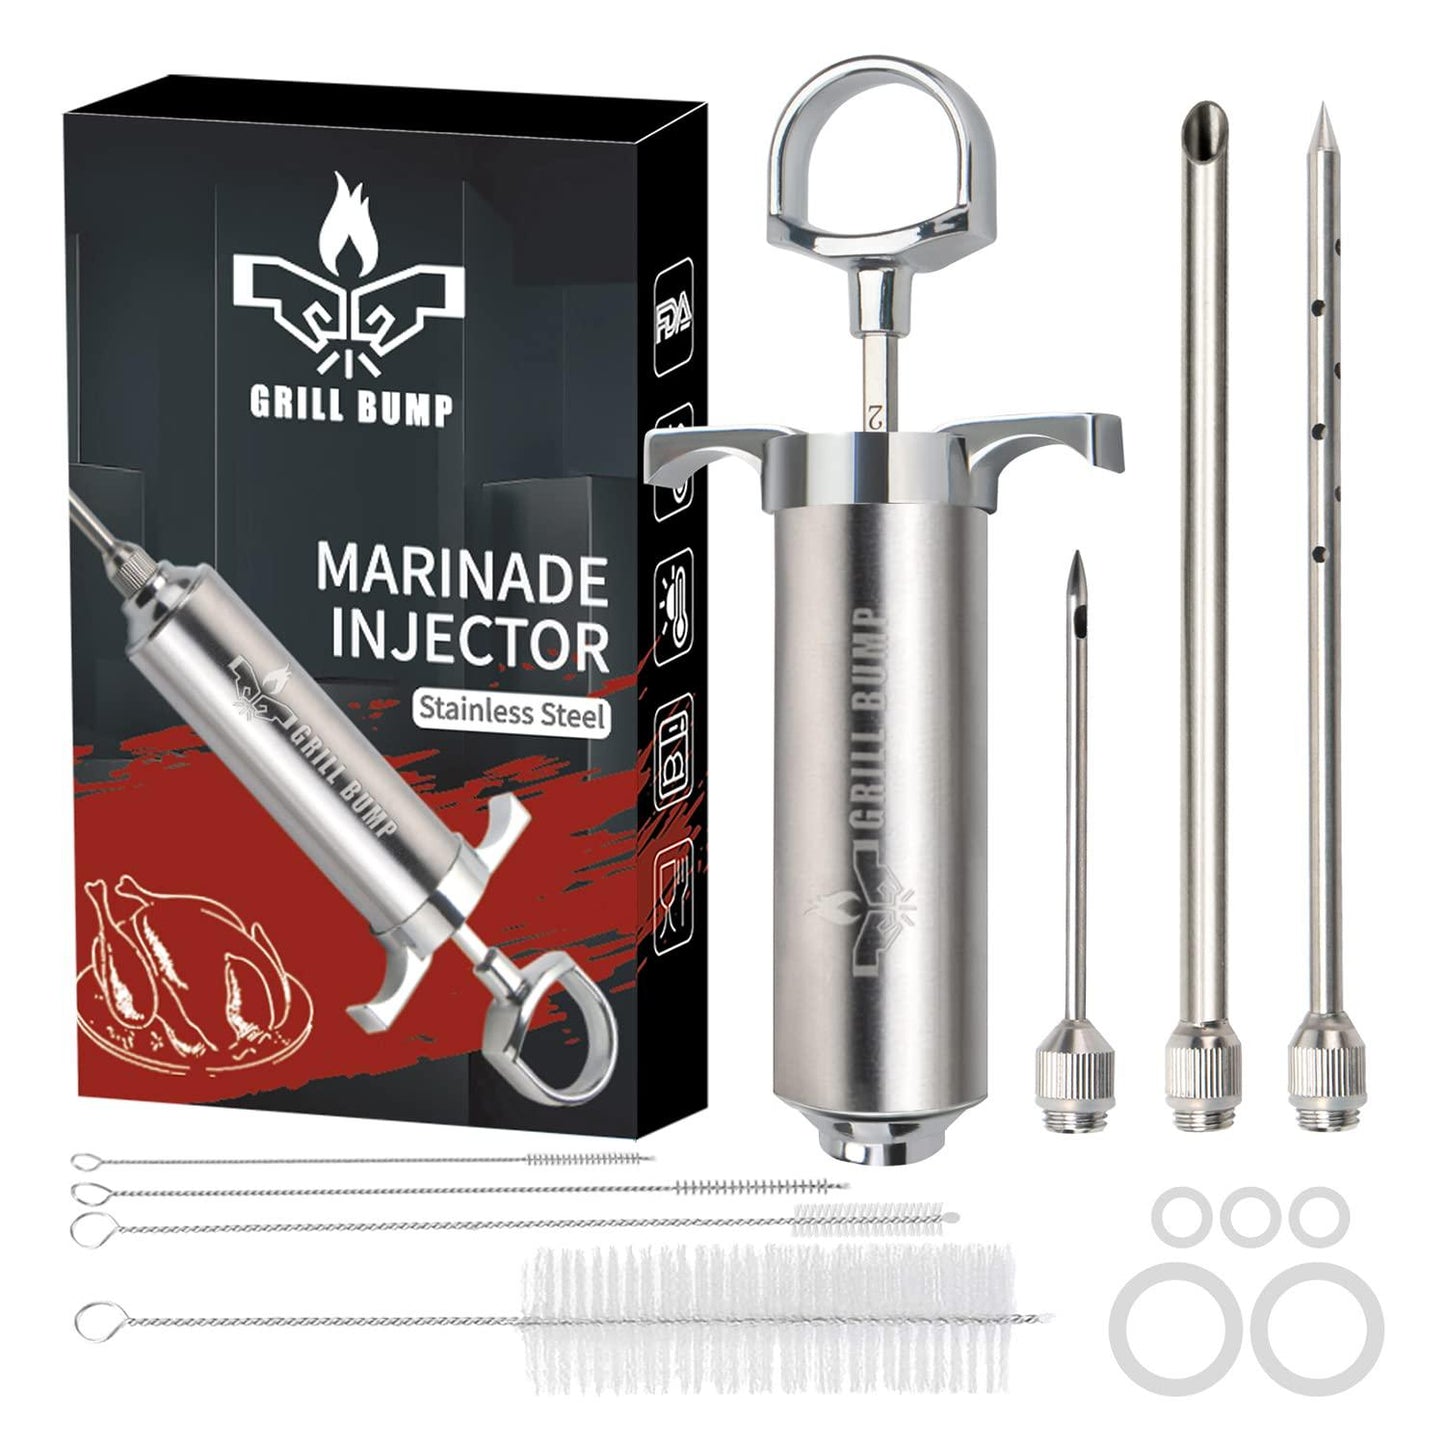 Grill Bump Meat Injector Syringe Kit with 3 Professional Marinade Injector Needles for BBQ Grill Smoker, Turkey and Brisket; 2-oz Large Capacity, Including Paper User Manual, Recipe E-Book (PDF) - CookCave